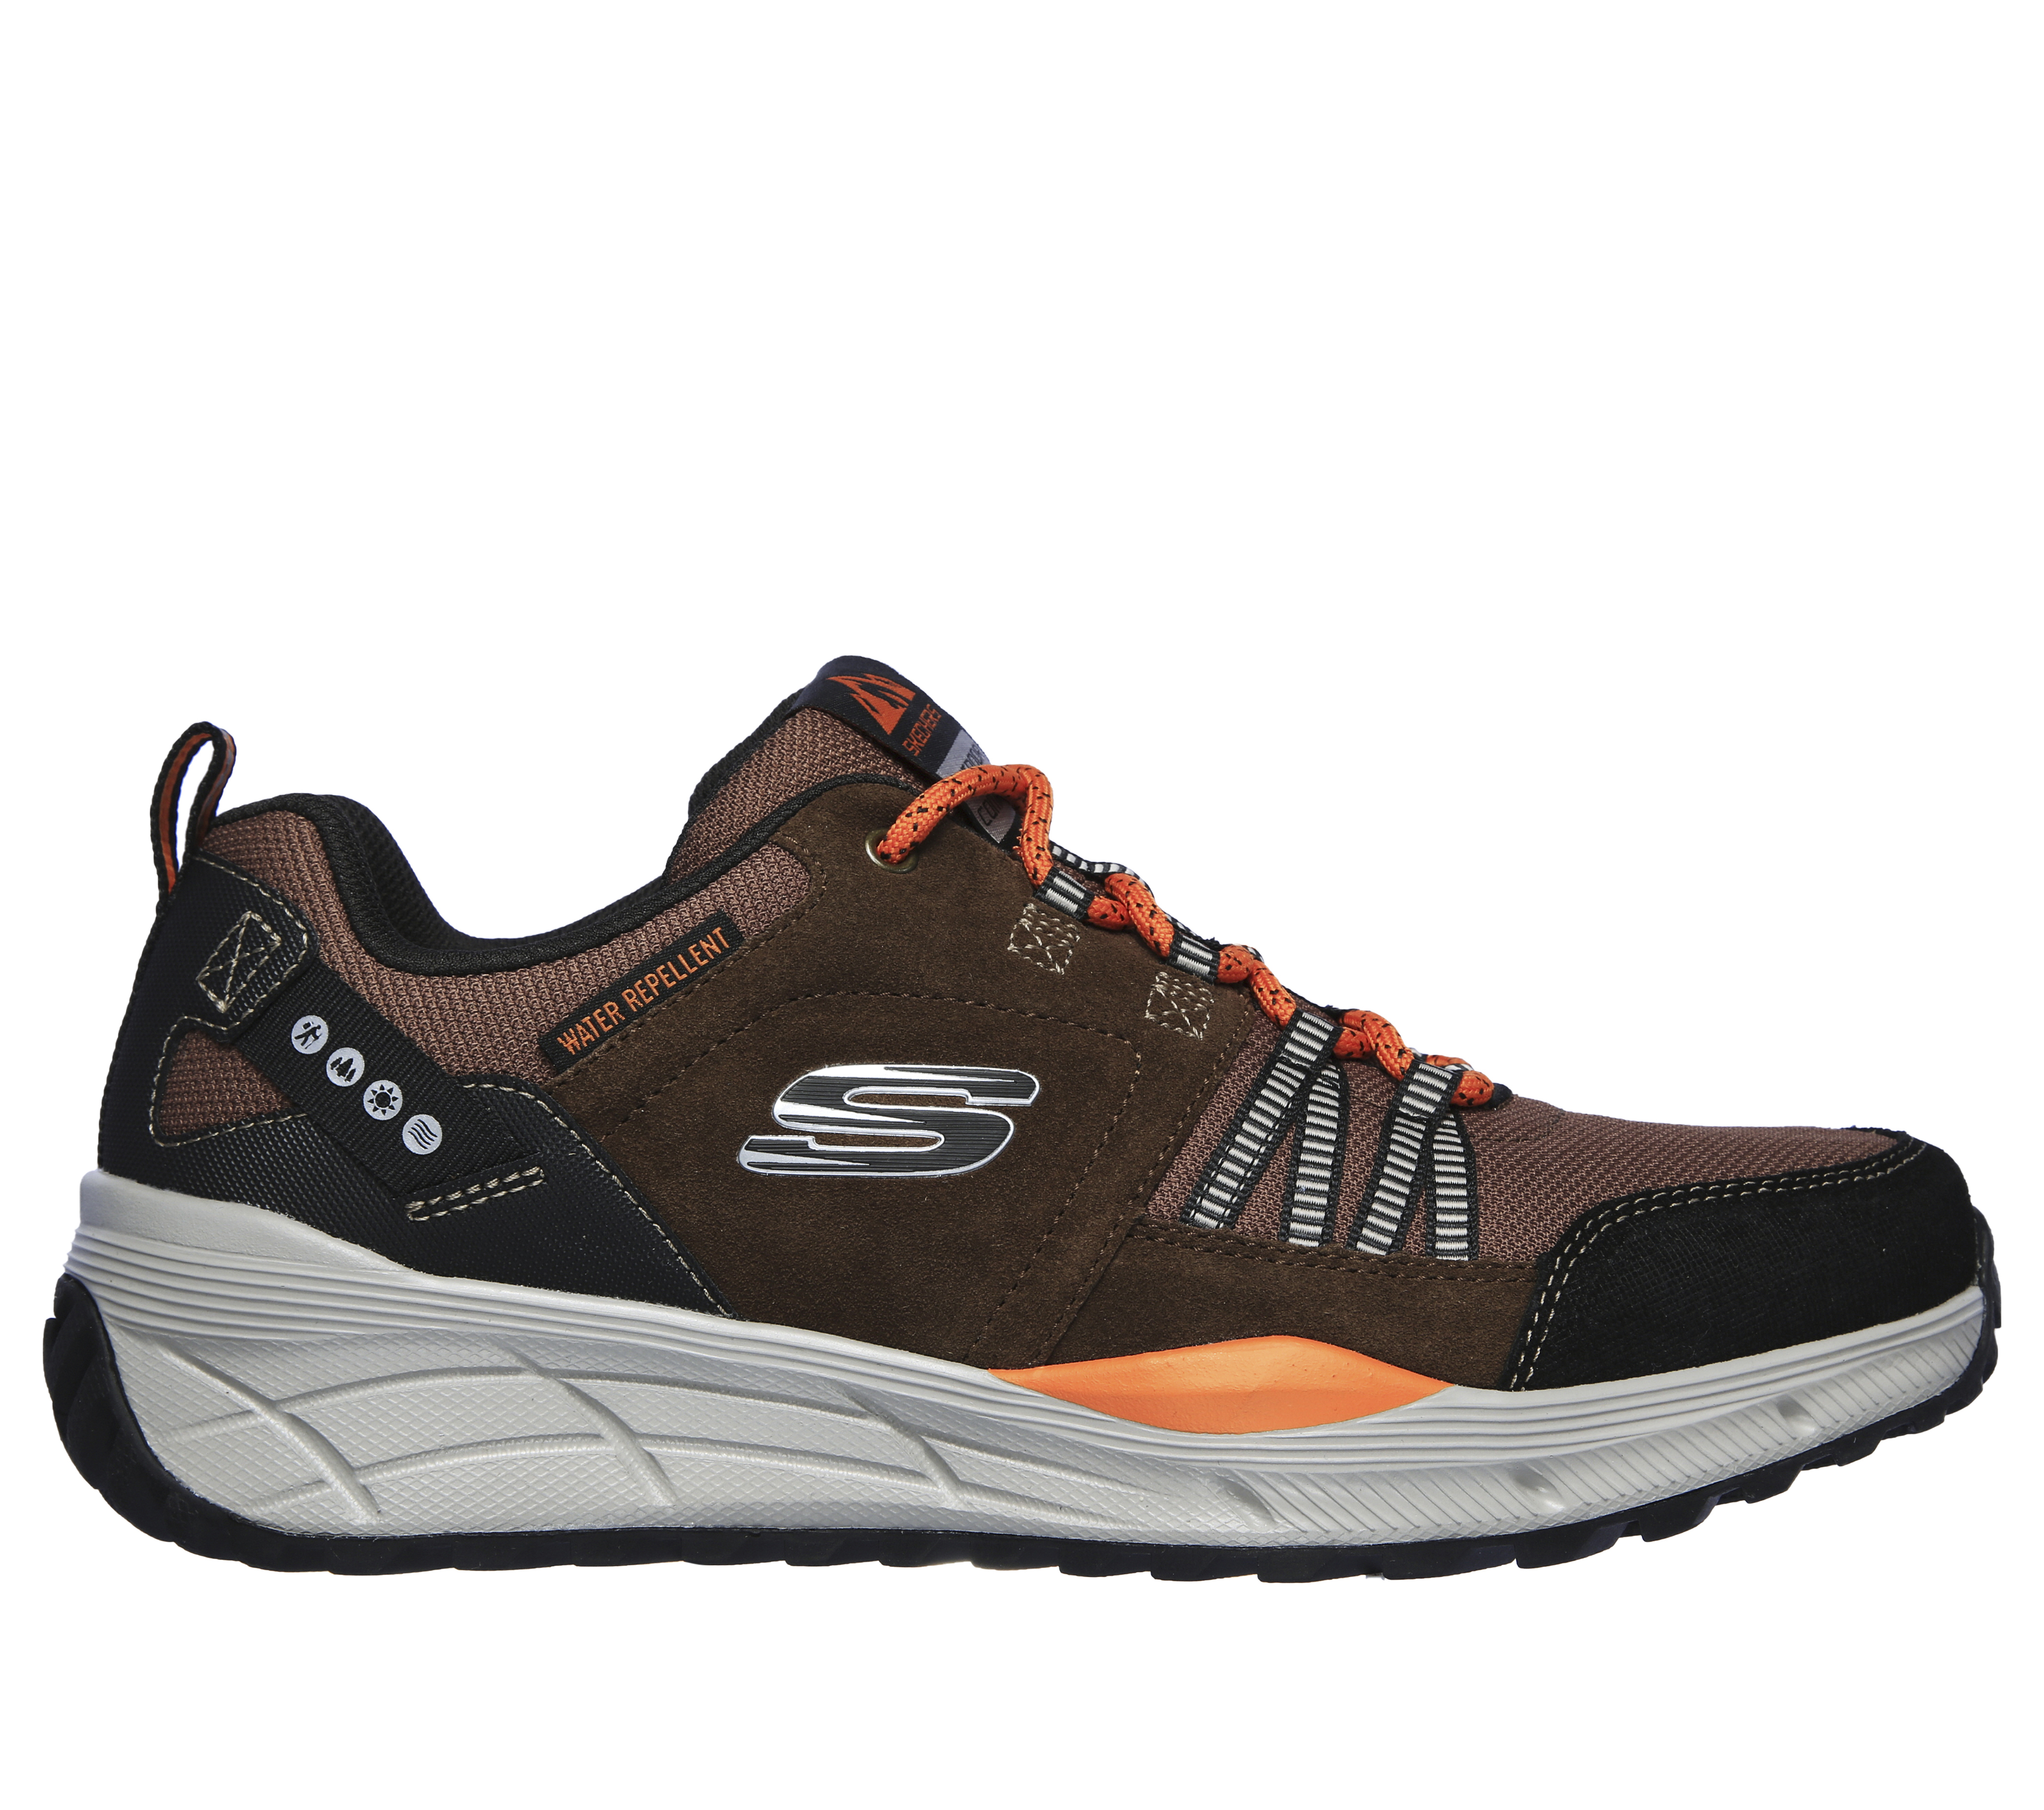 pegs Svaghed Jurassic Park Shop the Relaxed Fit: Equalizer 4.0 Trail | SKECHERS